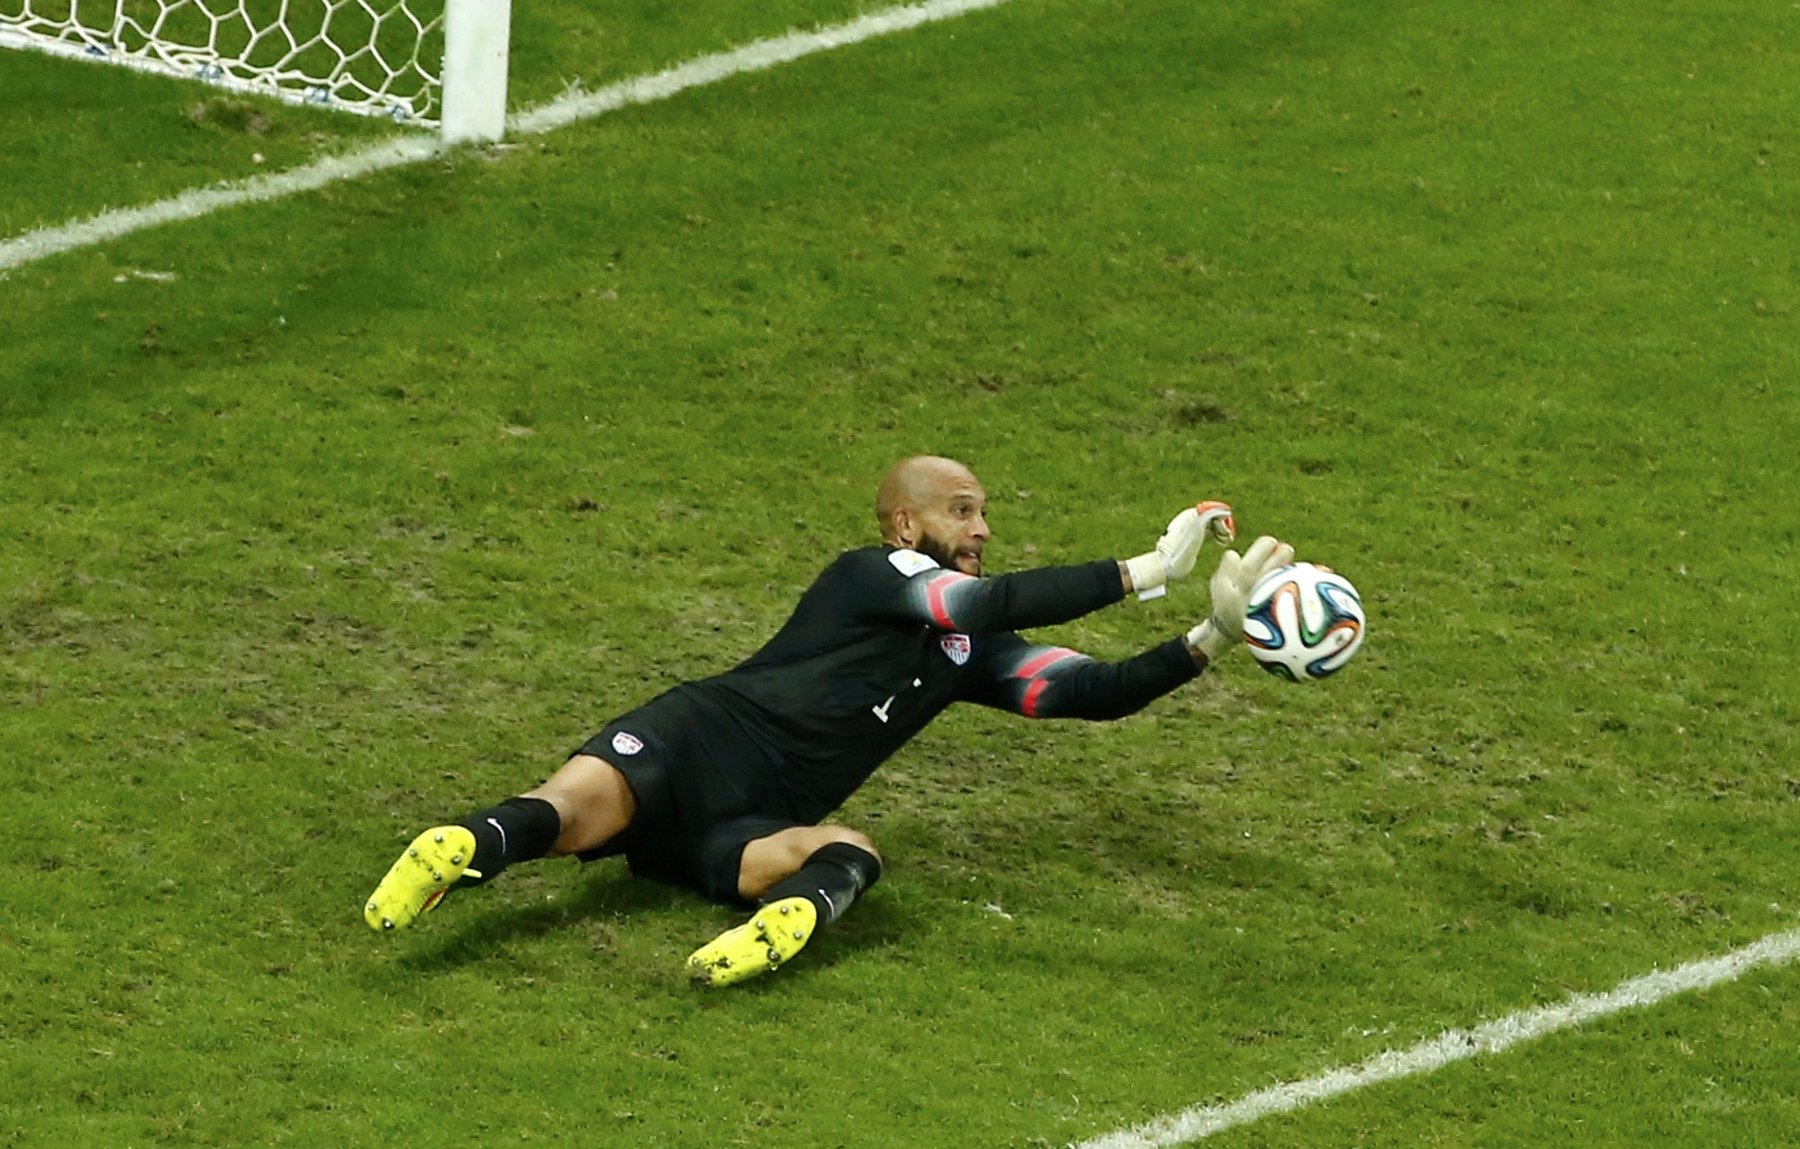 Goalkeeper Tim Howard of the U.S. saves a shot during their 2014 World Cup round of 16 game against Belgium at the Fonte Nova arena in Salvador, Brazil on July 1, 2014.